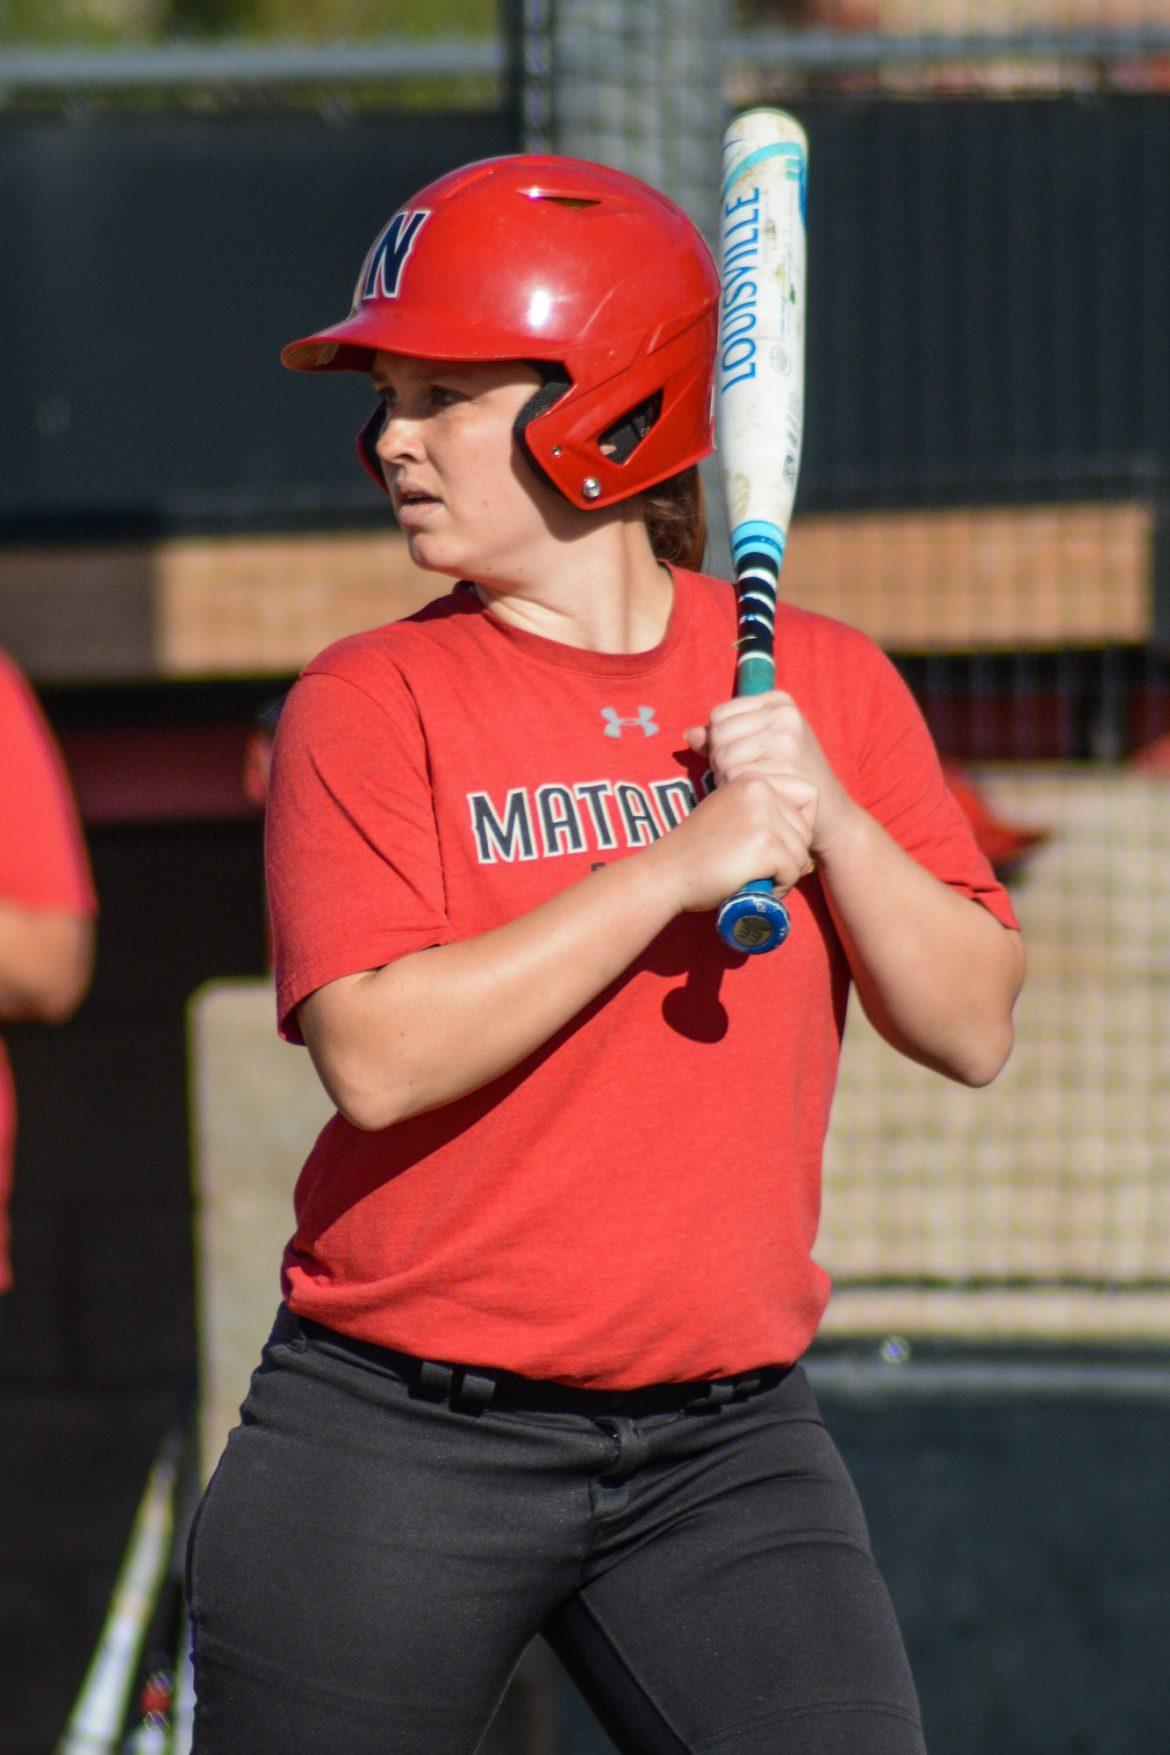 softball+player+at+bat+in+red+uniform